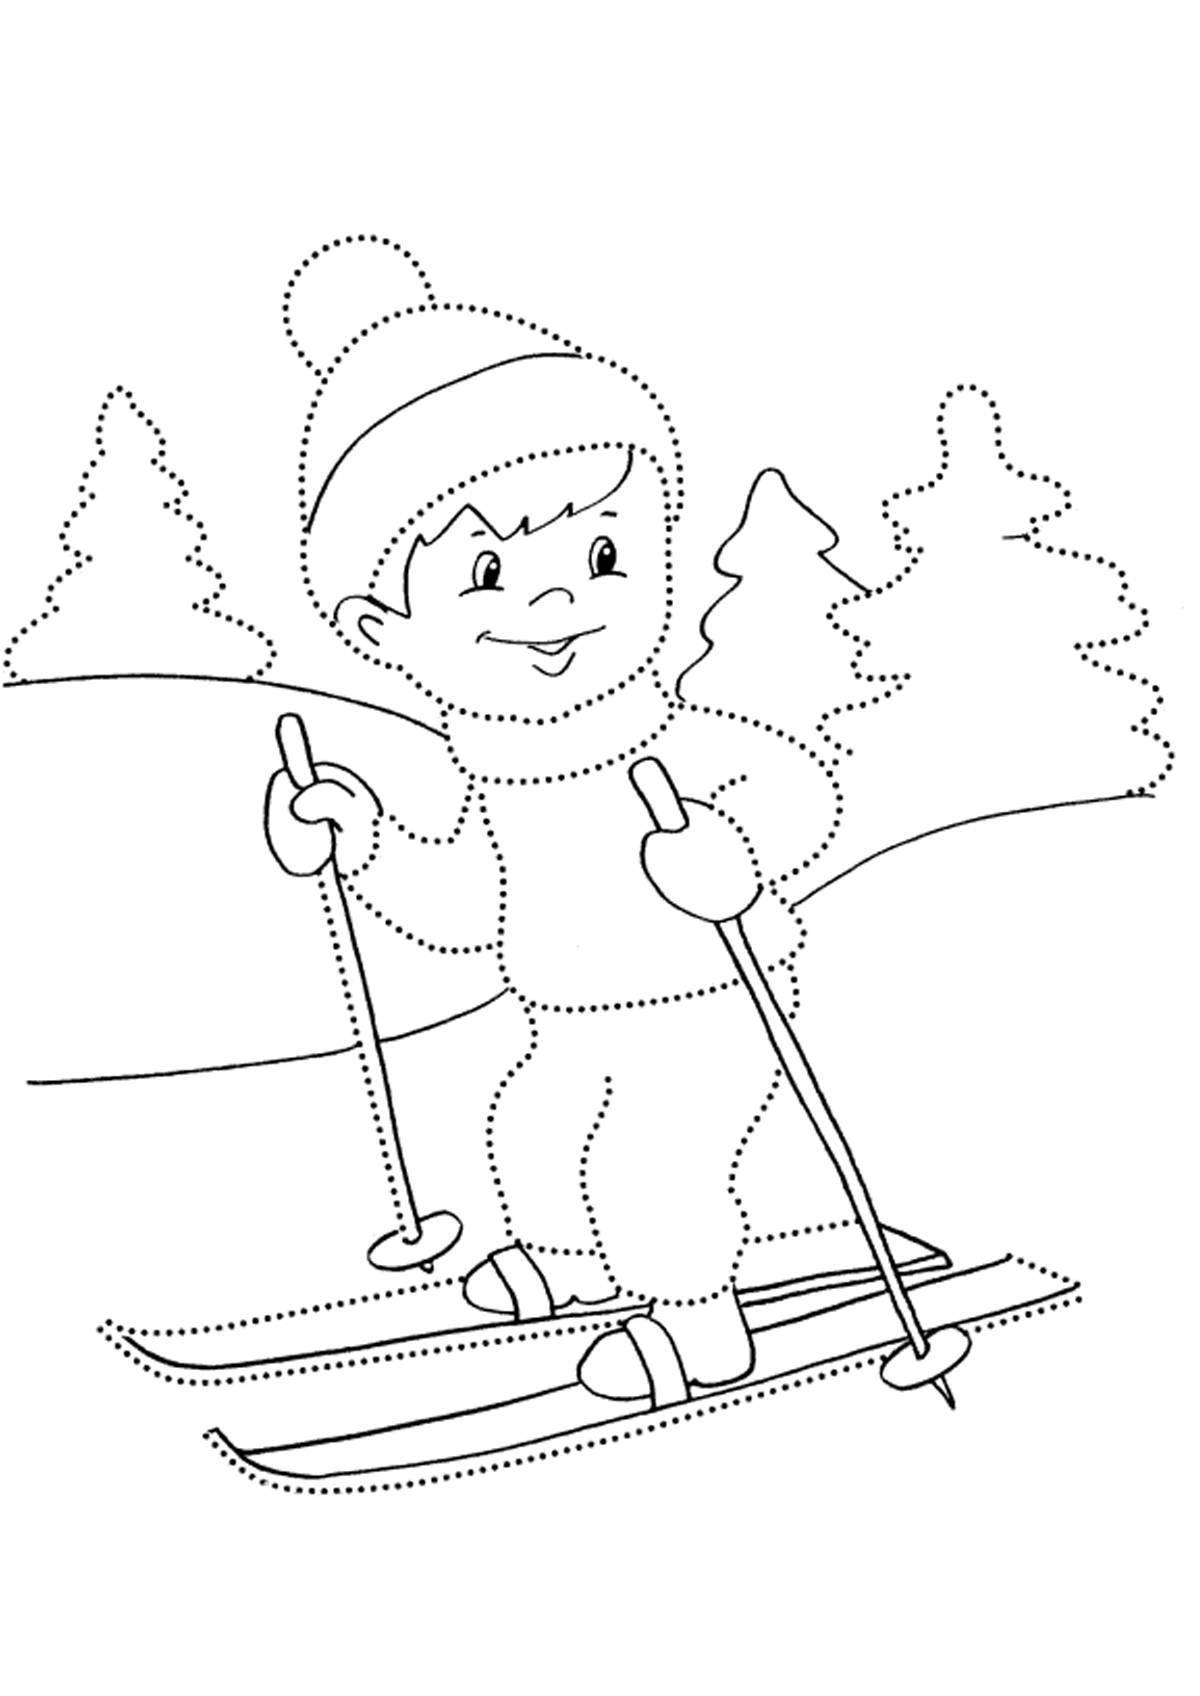 Great winter sports coloring book